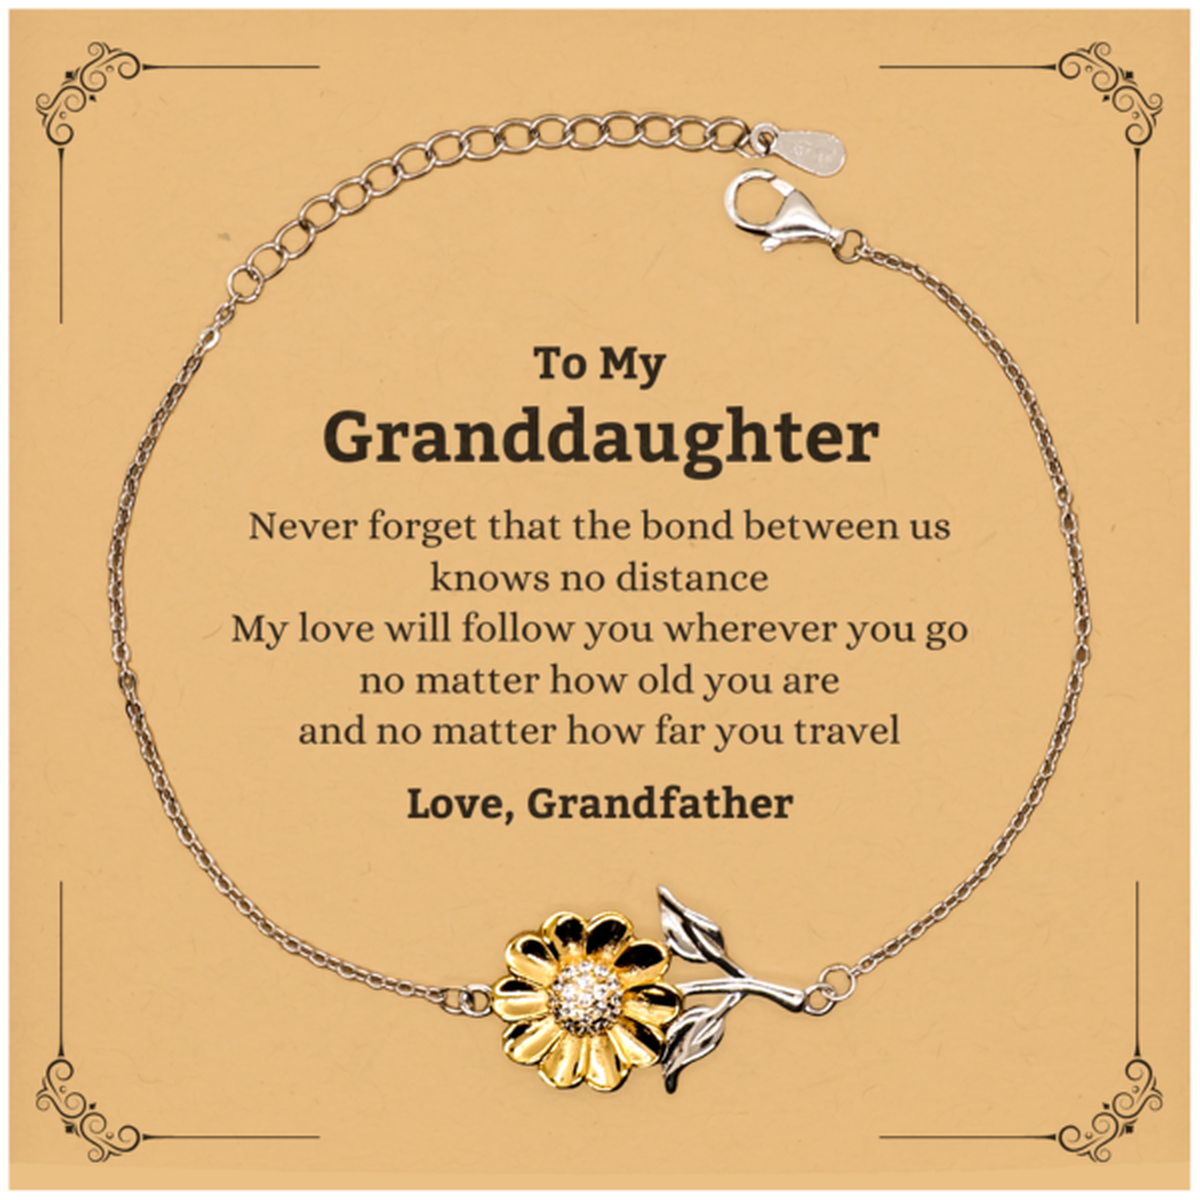 Granddaughter Birthday Gifts from Grandfather, Adjustable Sunflower Bracelet for Granddaughter Christmas Graduation Unique Gifts Granddaughter Never forget that the bond between us knows no distance. Love, Grandfather